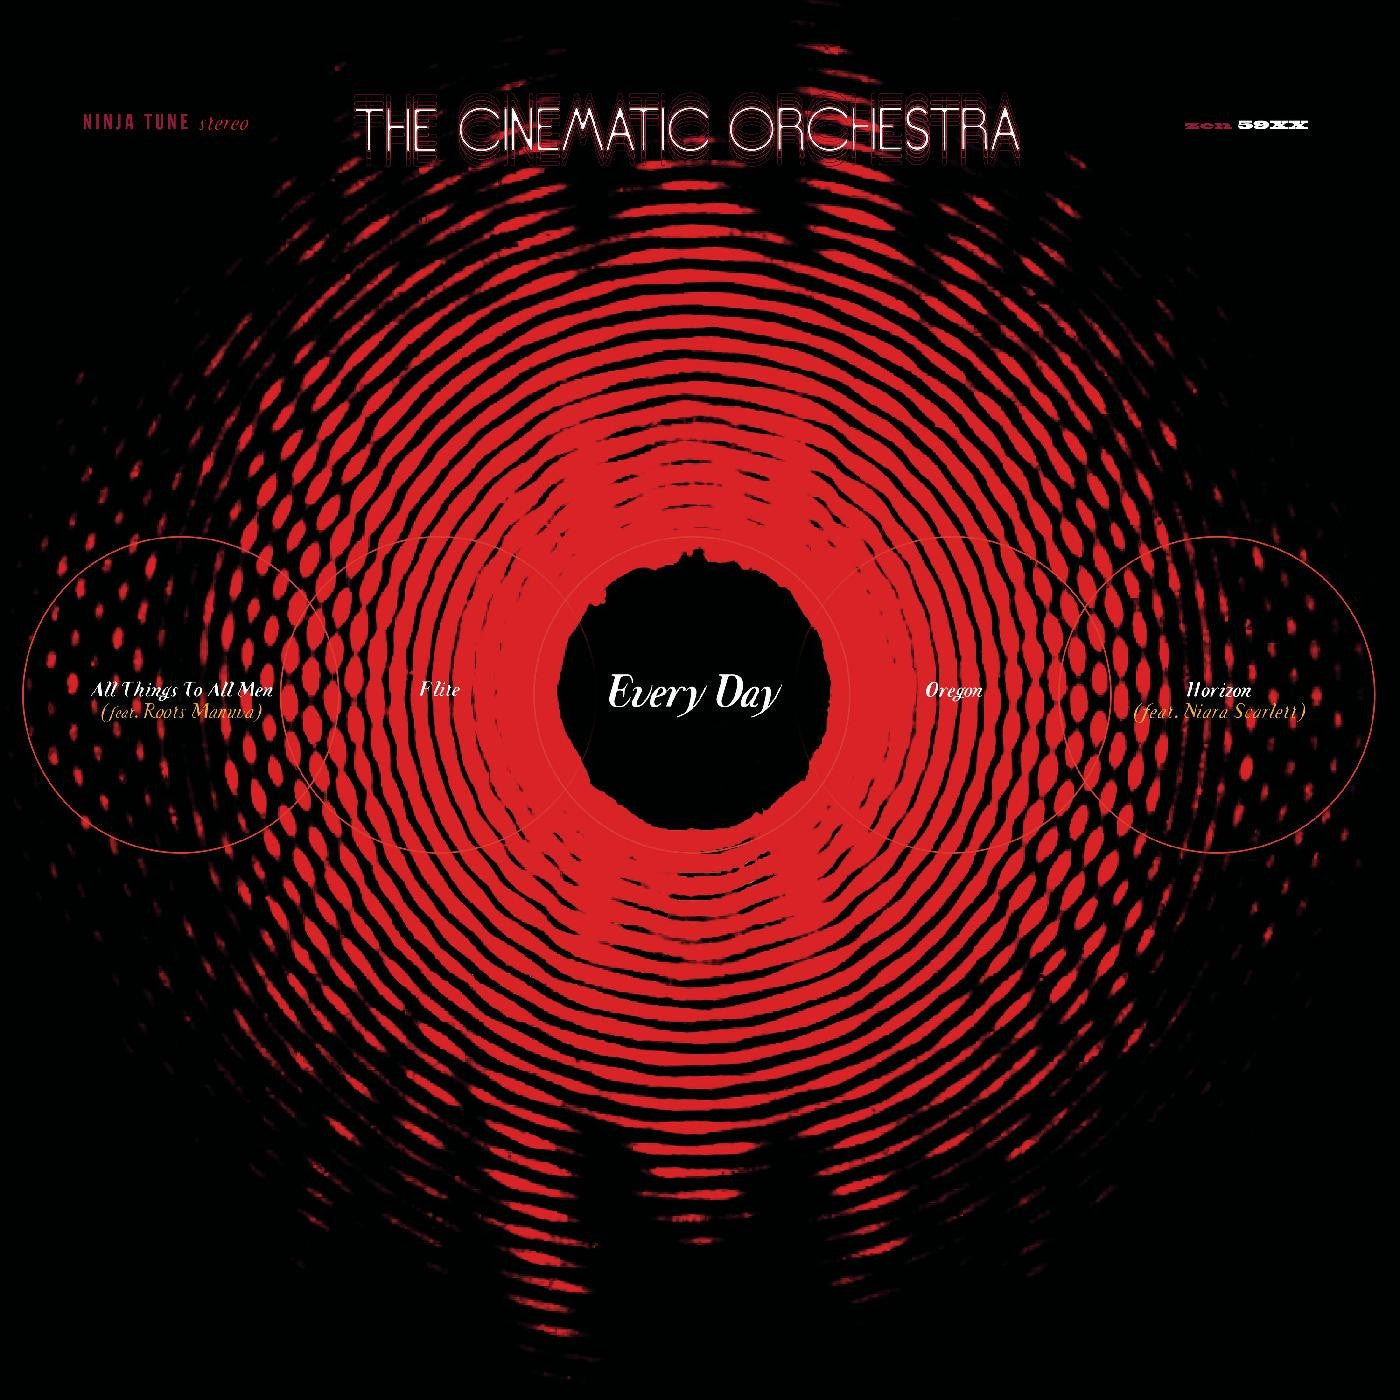 The Cinematic Orchestra – Every Day (2002) - New 2 LP Record Ninja Tune 2023 REd Vinyl - Electronic / Future Jazz / Downtempo